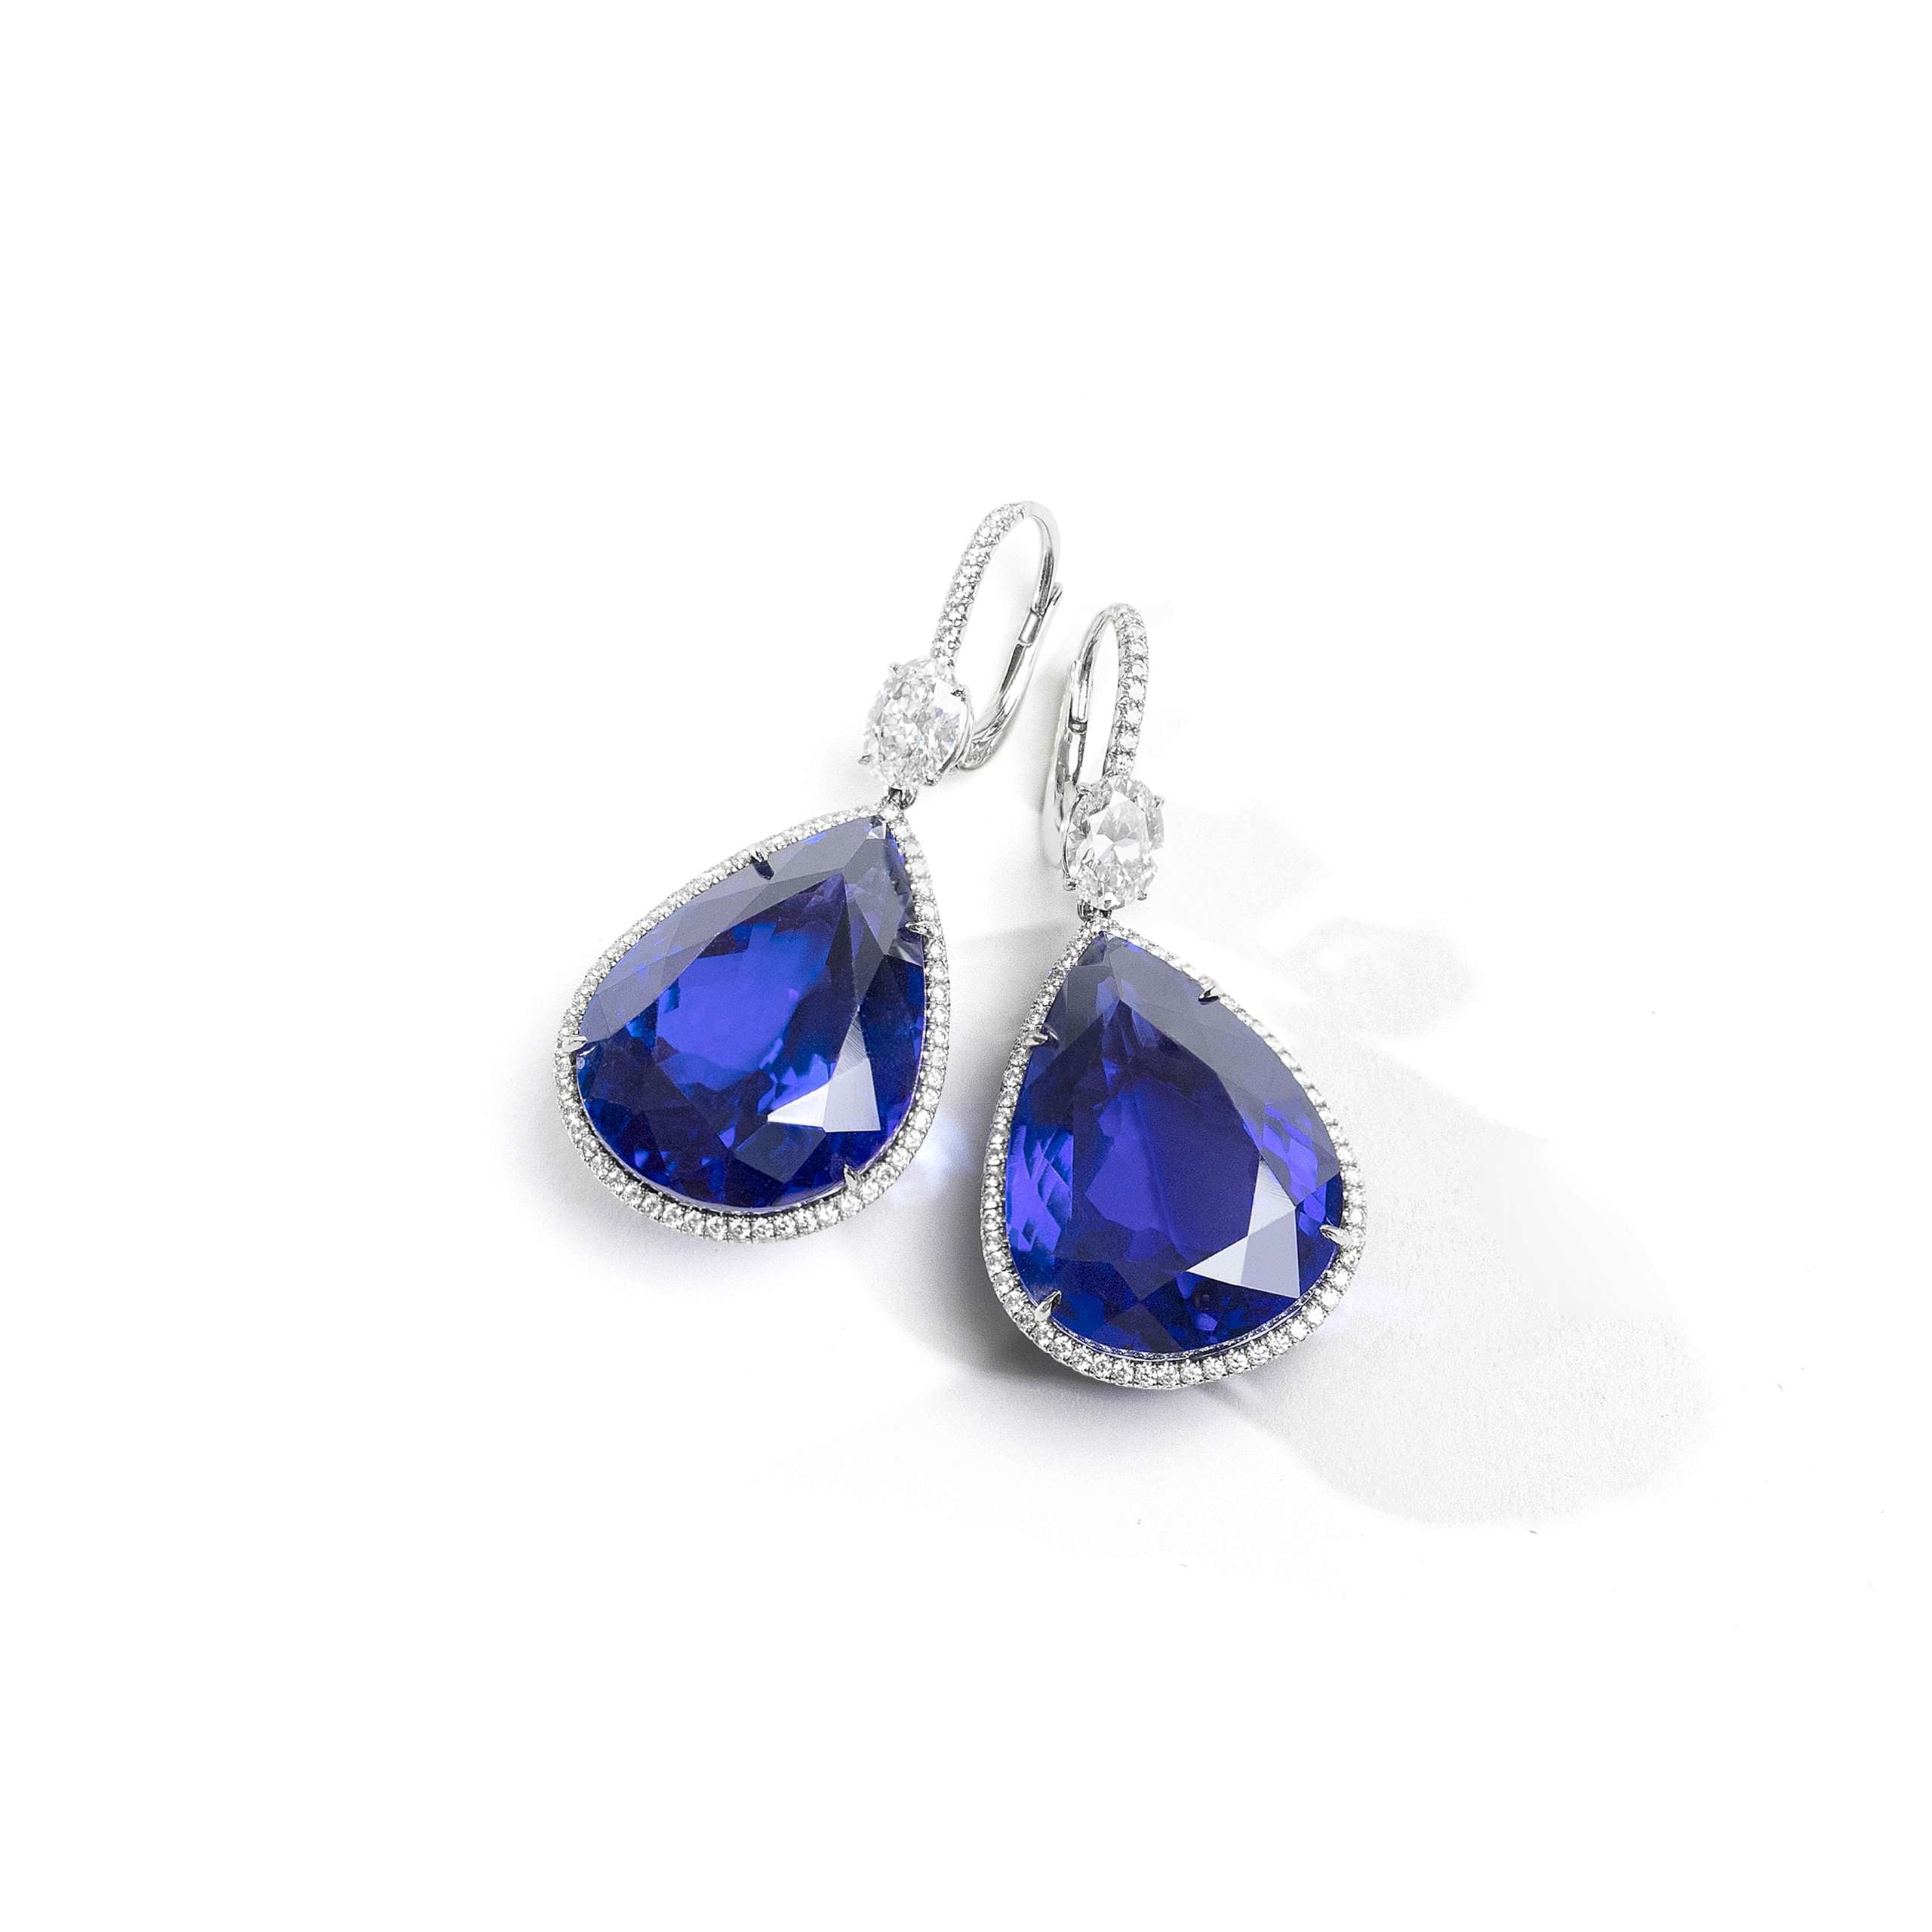 Blue Sapphire Earrings from the Front